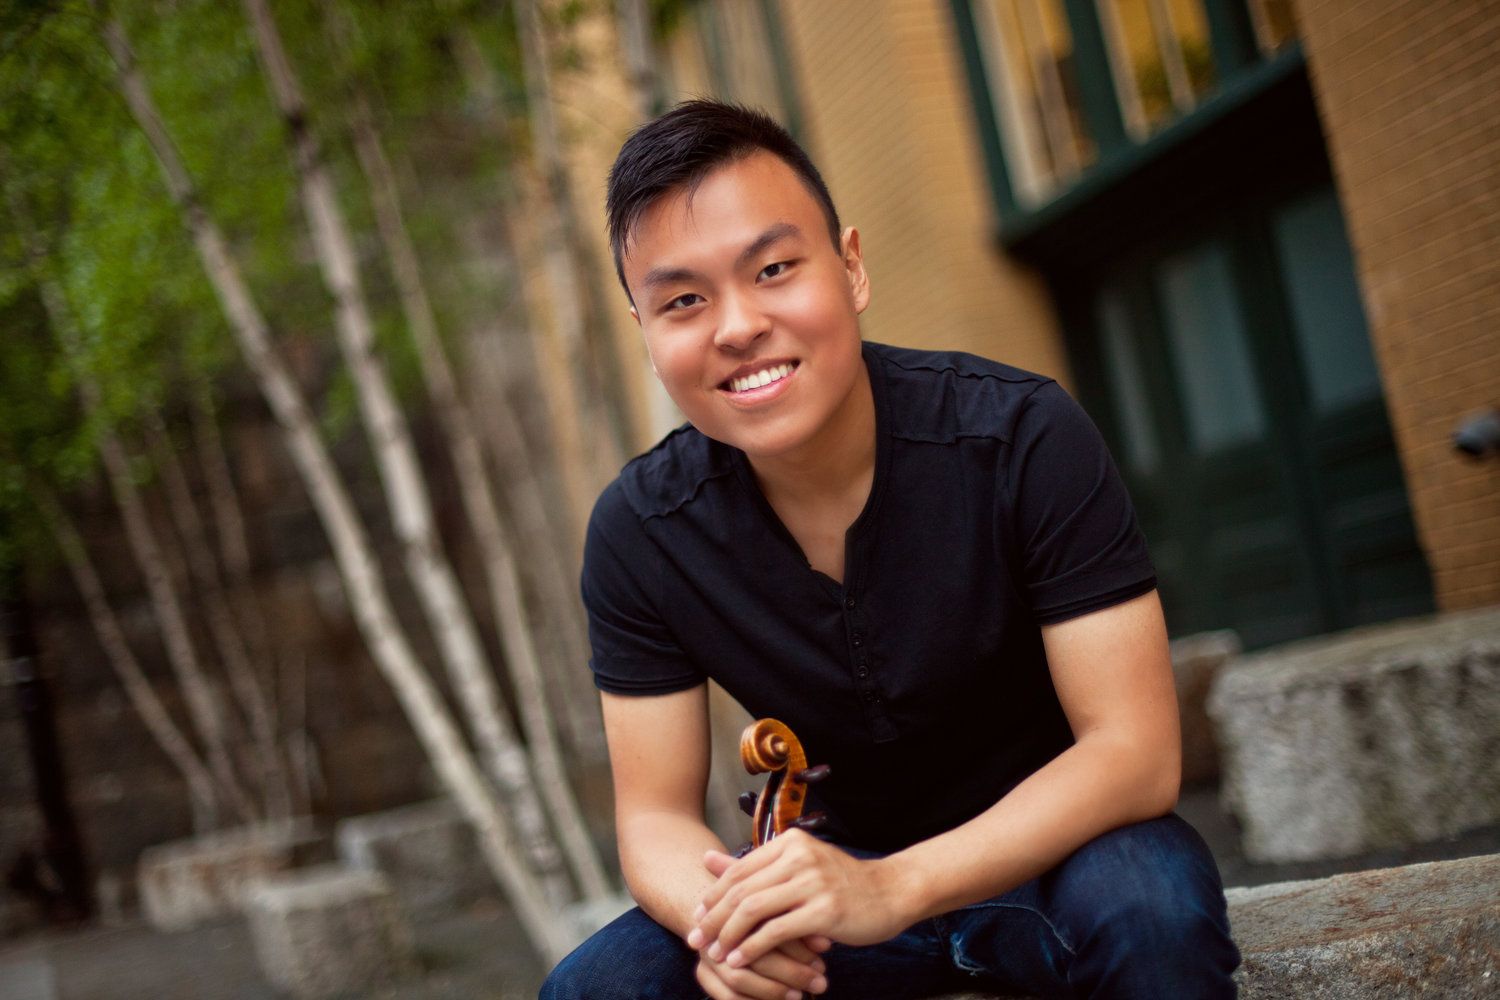 Luke Hsu smiles and holds his violin while sitting outdoors on some steps.